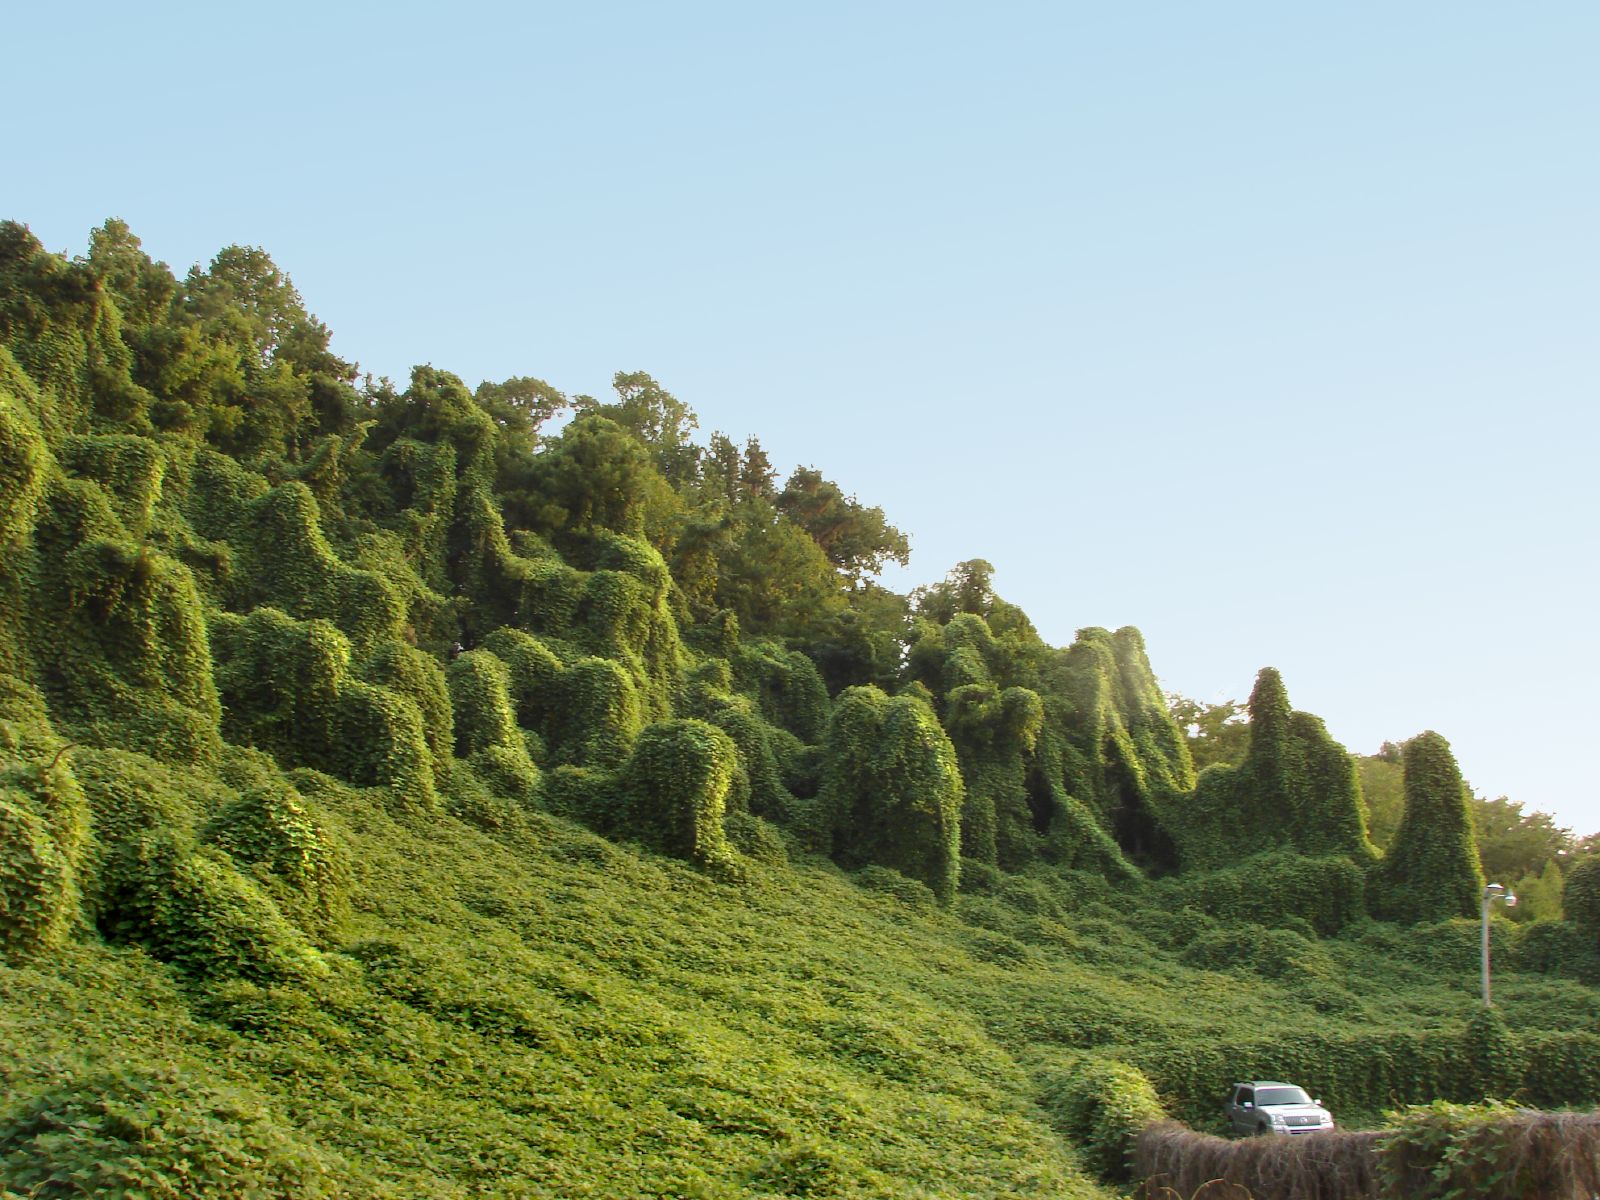 The vine kudzu grows over trees and other structures along a slope, totally covering them.